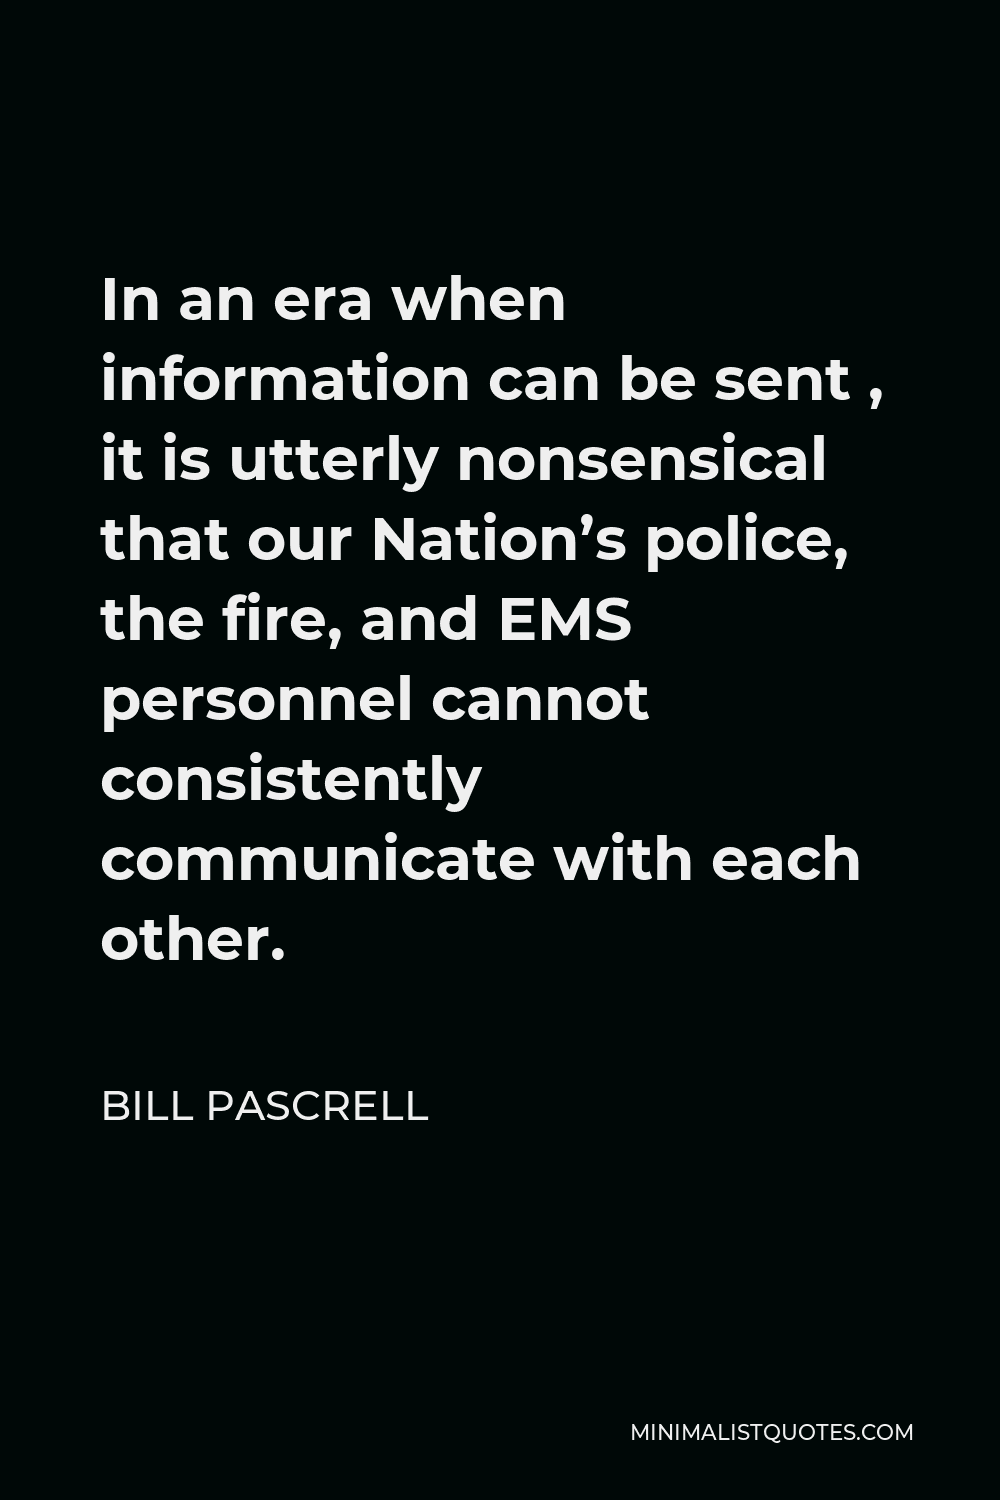 Bill Pascrell Quote - In an era when information can be sent , it is utterly nonsensical that our Nation’s police, the fire, and EMS personnel cannot consistently communicate with each other.